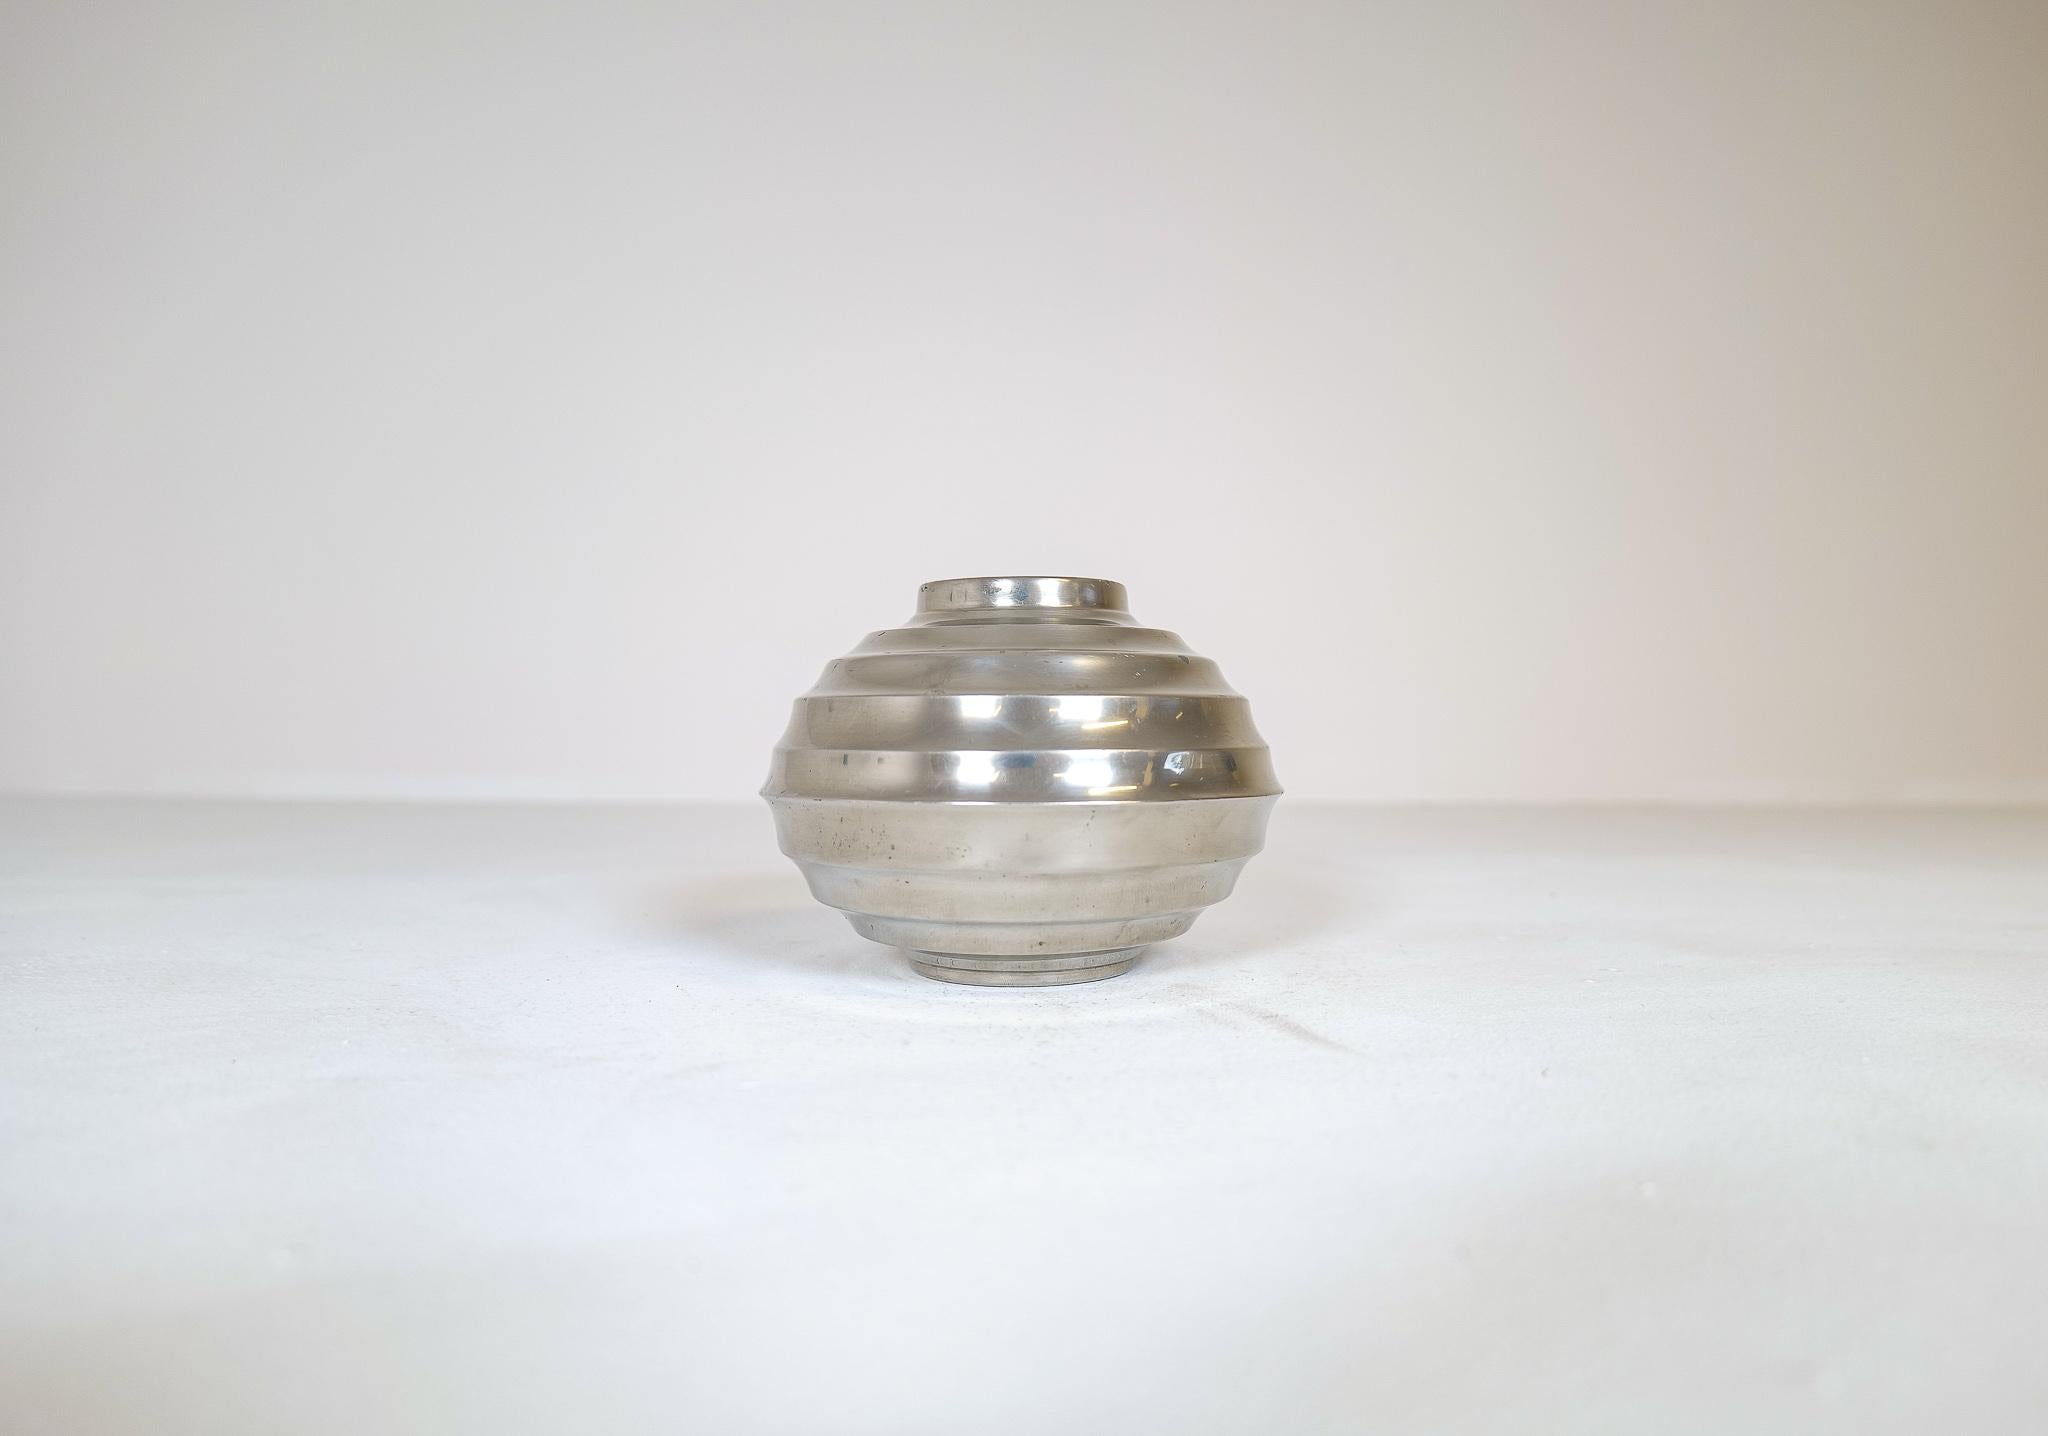 Wonderful Art Deco vase made in Sweden. The shape of this globe vase is typical for the art deco period. The pewter is shaped in a wonderful way to give it a highly decorative look. 

It’s in good vintage condition with wear and patina small